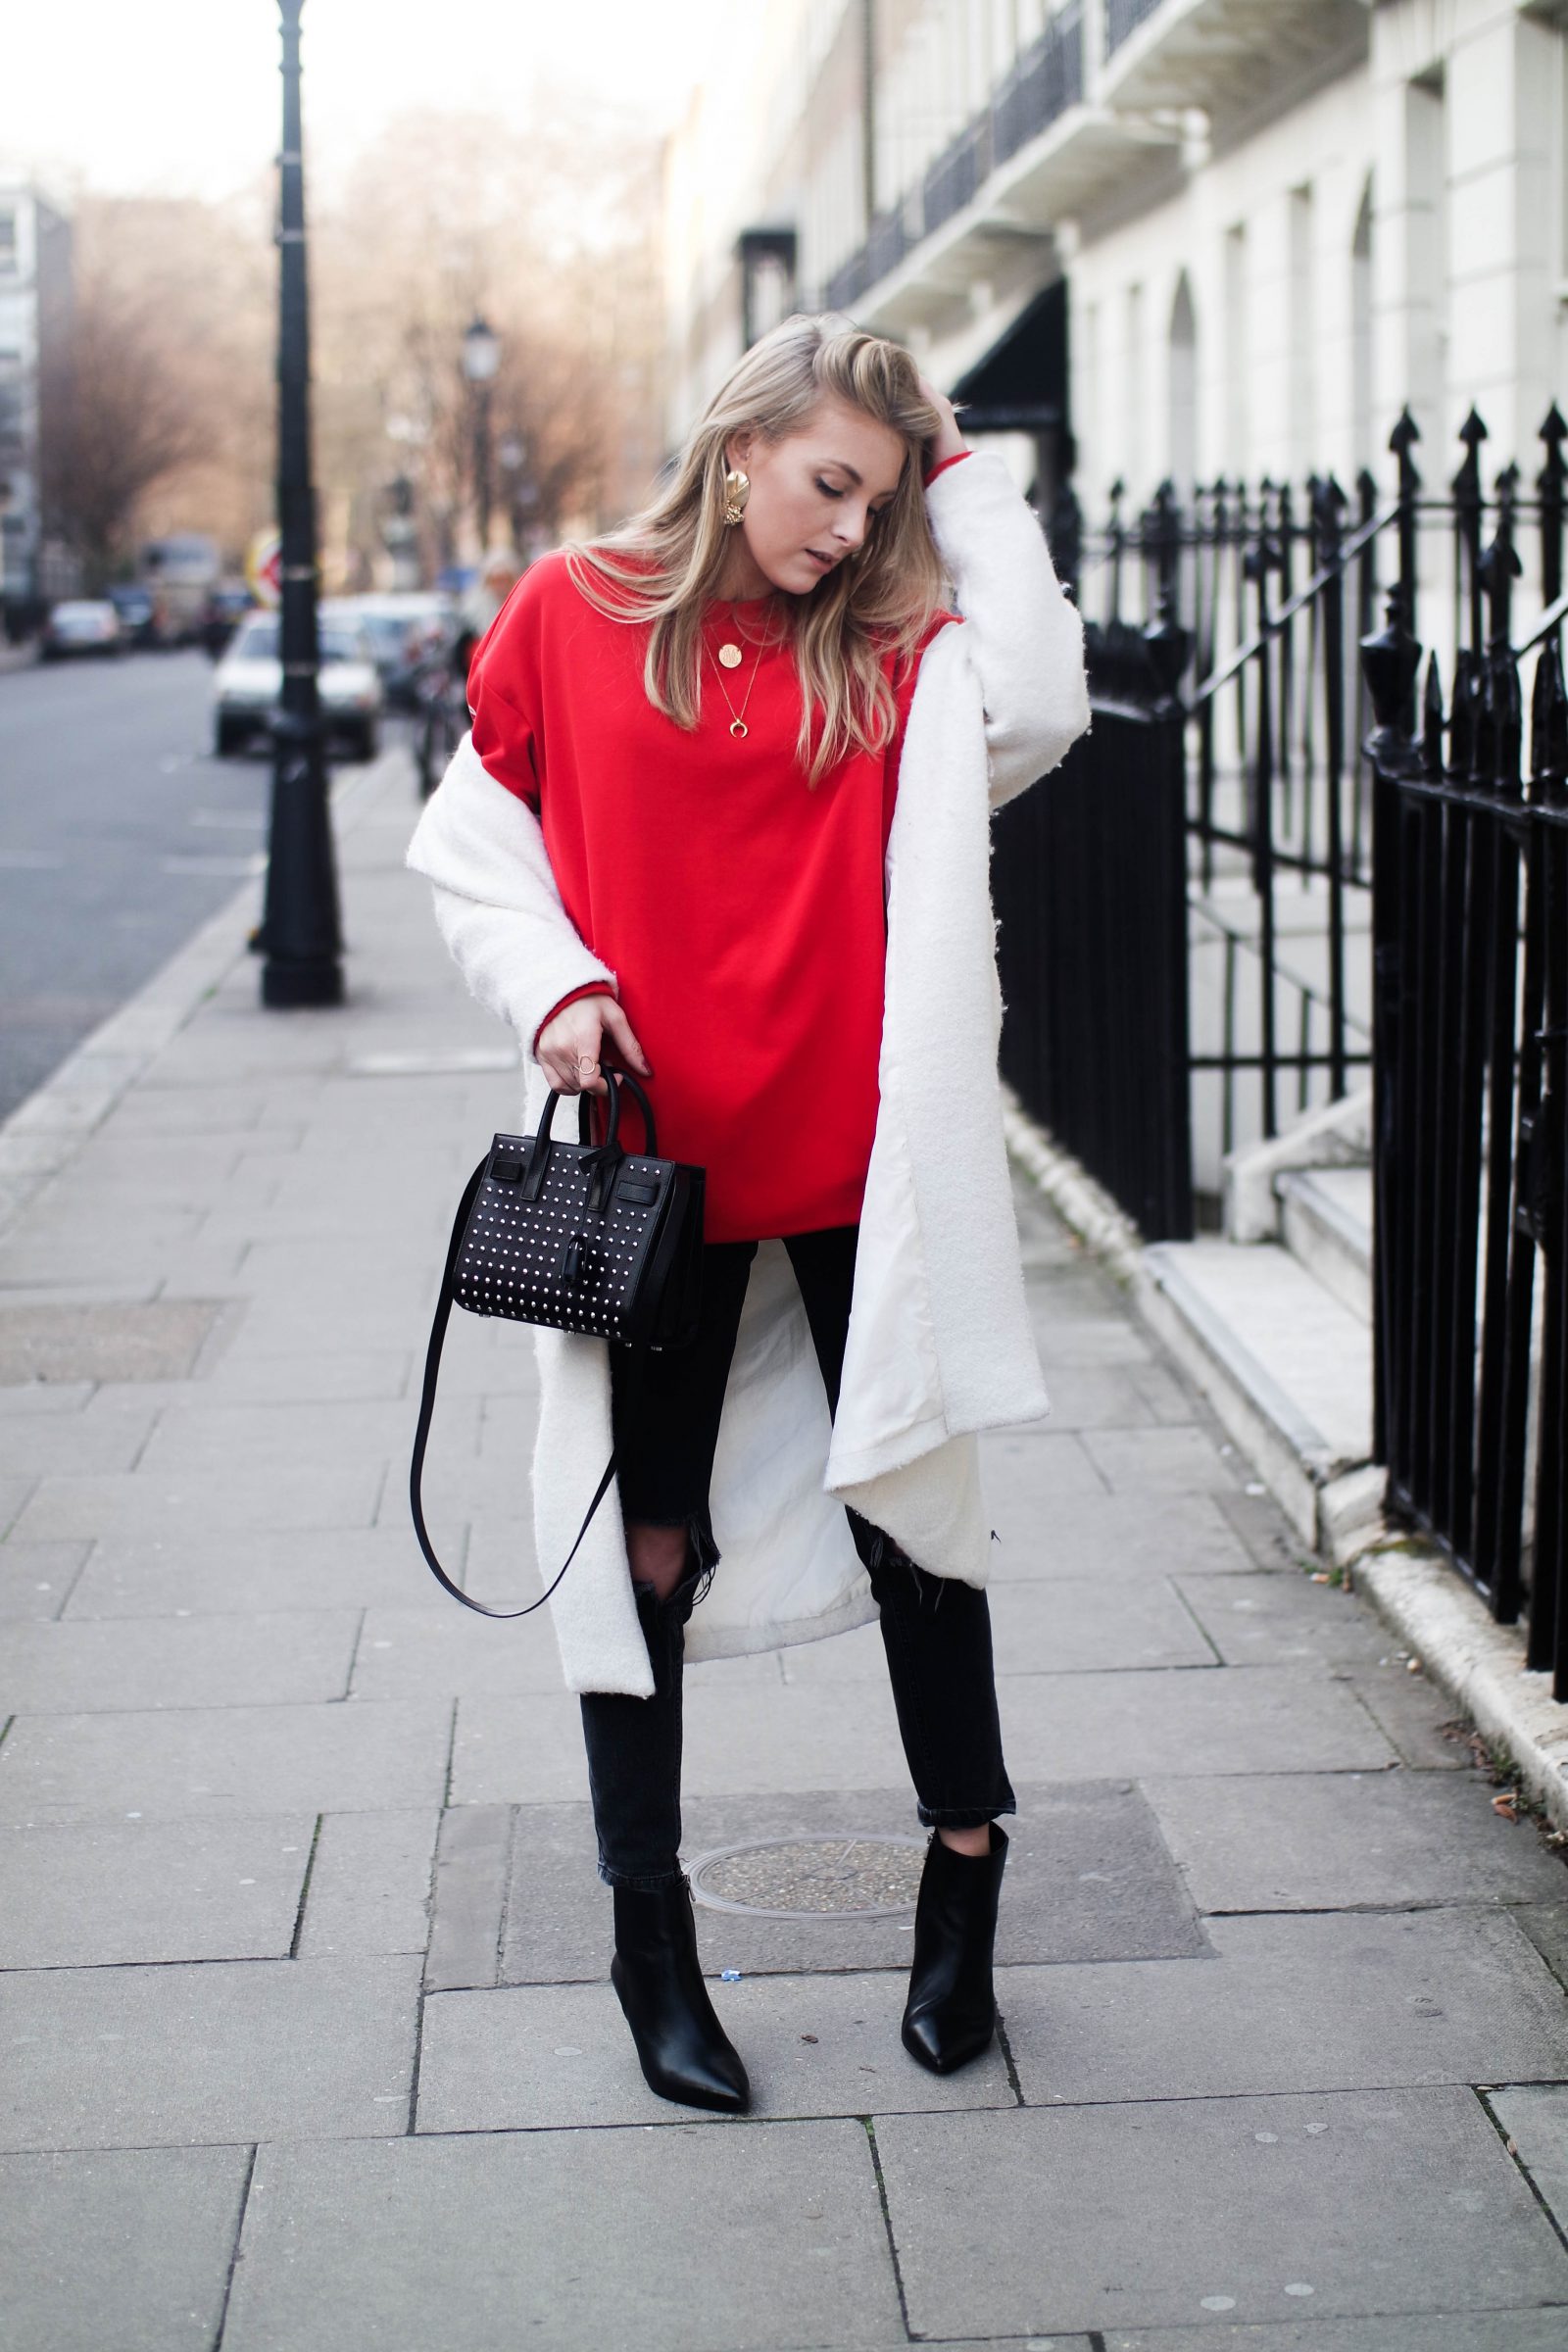 LFW DAY 2 - Red Alert - Street Style